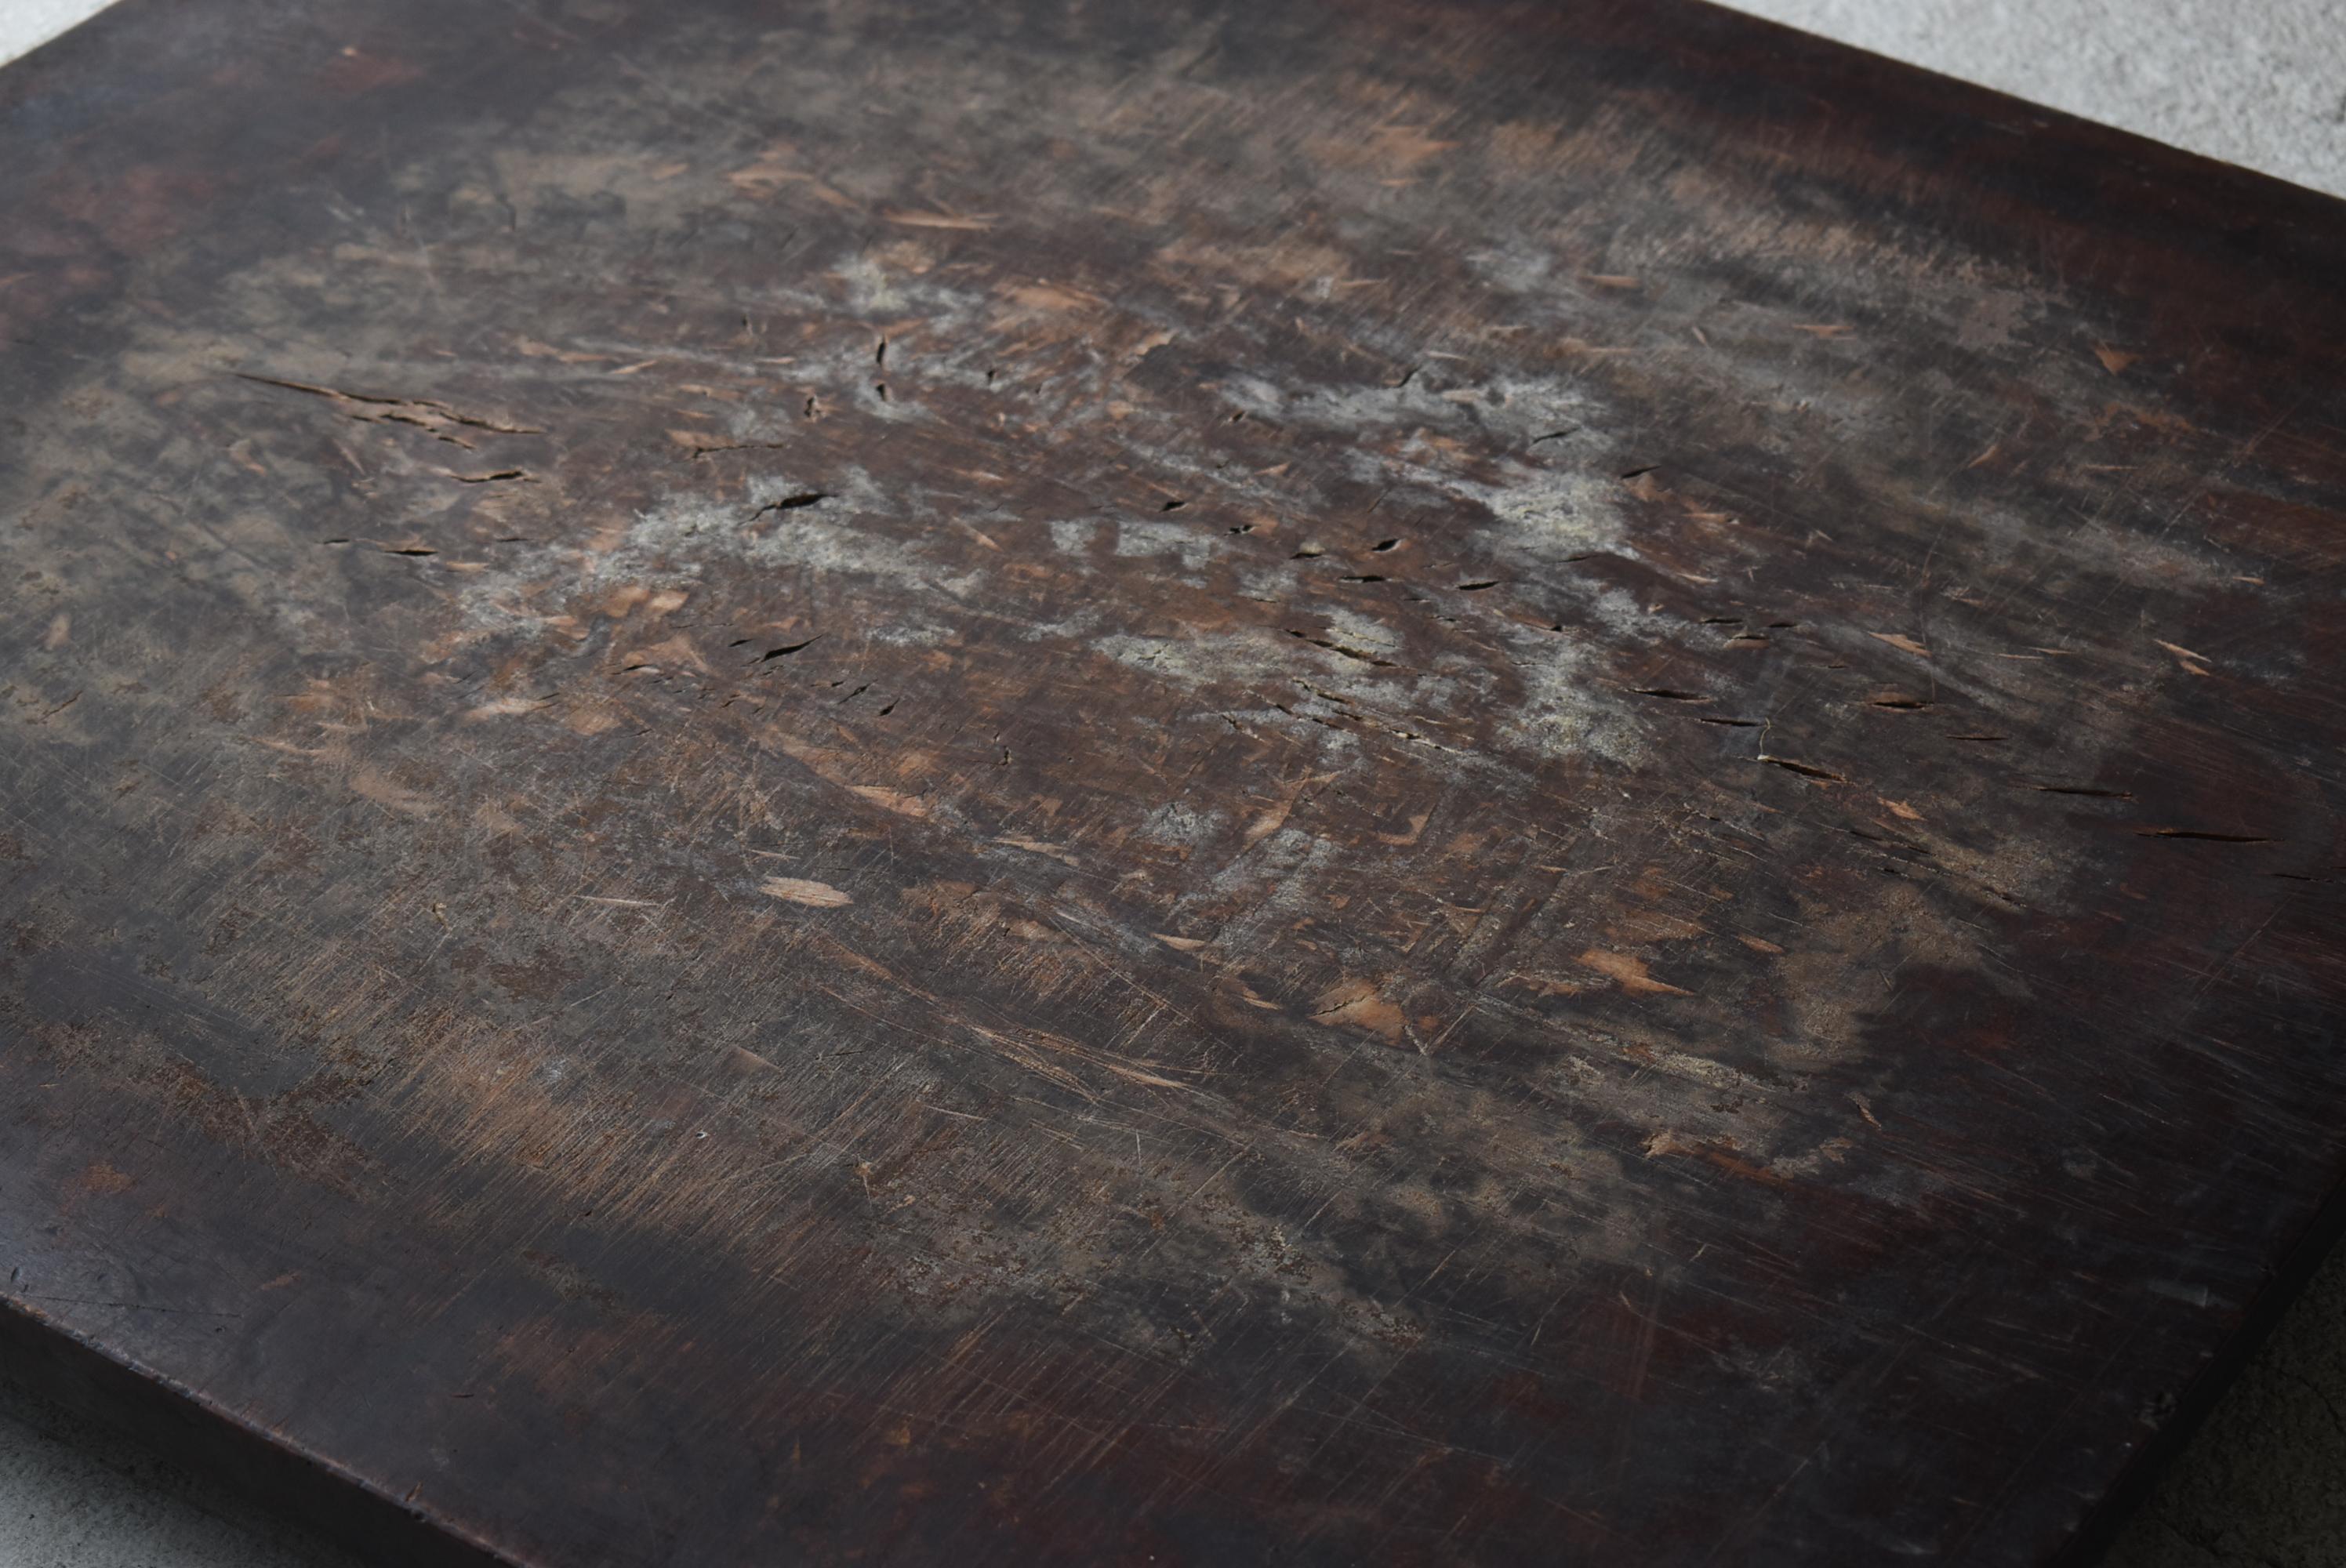 Japanese Antique Wooden Board 1860s-1900s / Abstract Art Low Table Wabi Sabi 3